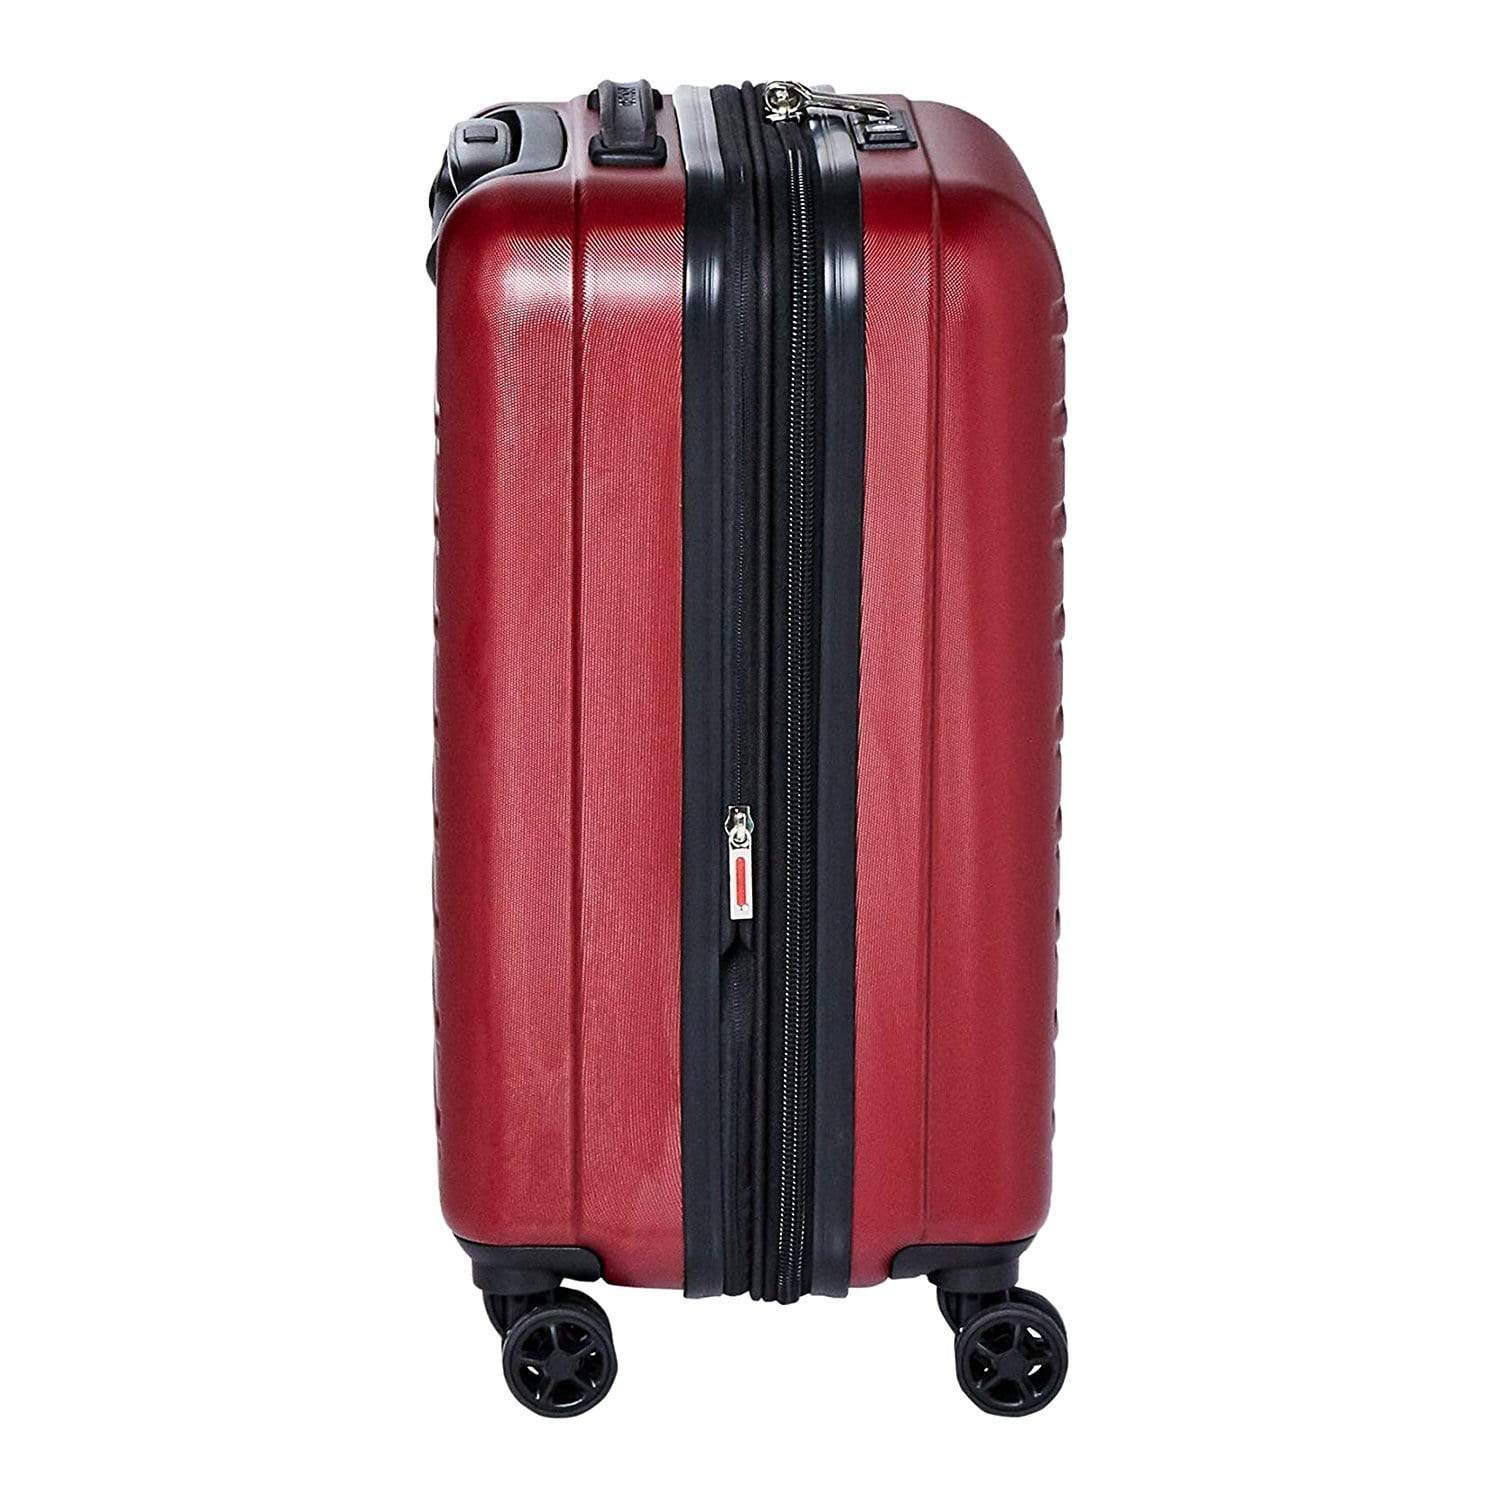 Delsey Segur 2.0 4 Double Wheel Expandable Cabin Trolley Bag - Red, 55 cm - 00205880404 RED - Jashanmal Home